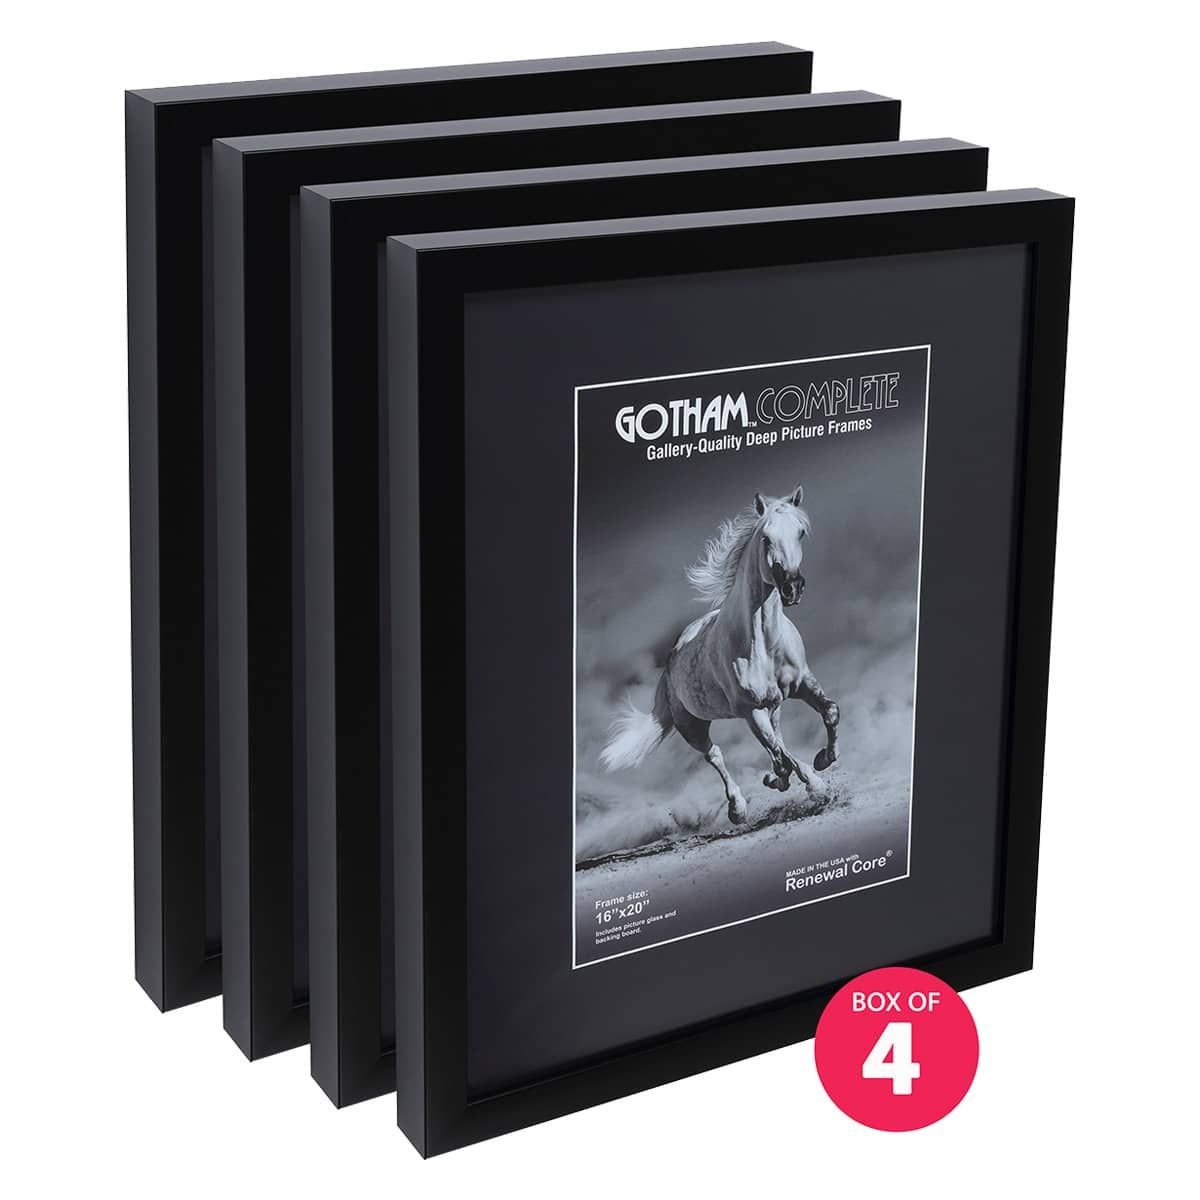 Gotham Complete Black, 16"x20" Gallery Frame w/ Glass + Backing (Box of 4)